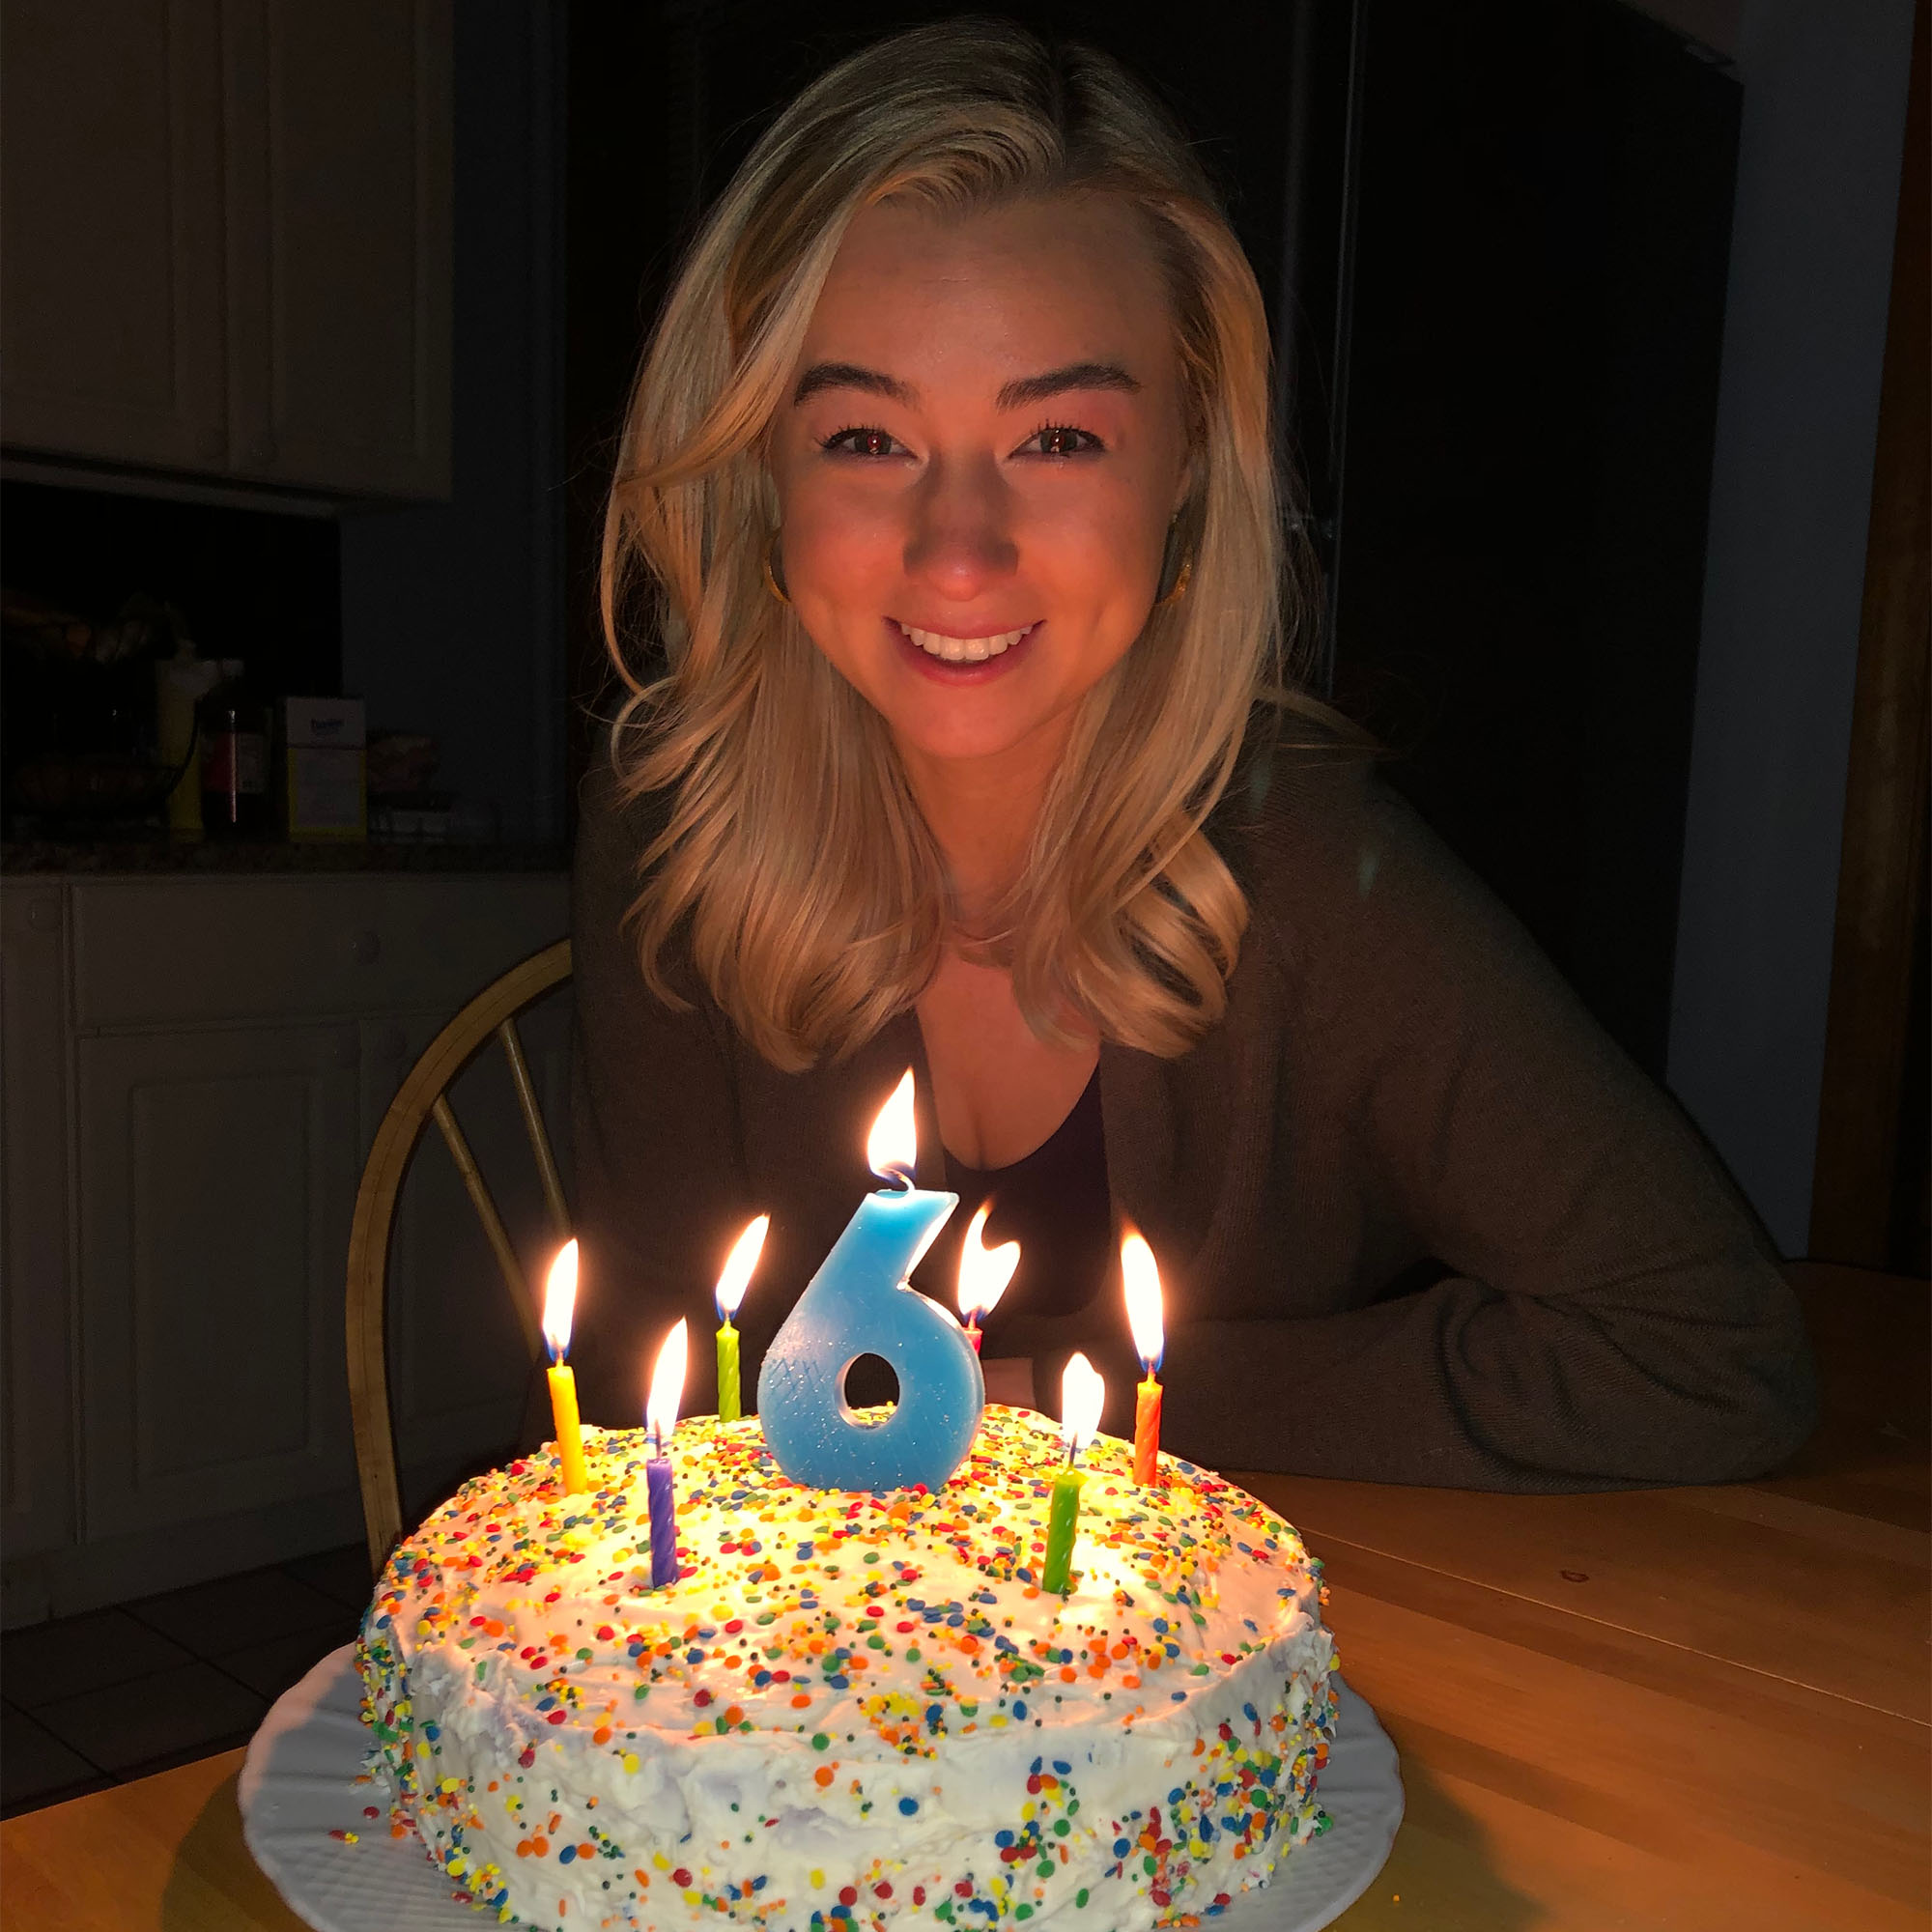 Photo: A young blonde woman in front of a cake with a large #6 candle on it